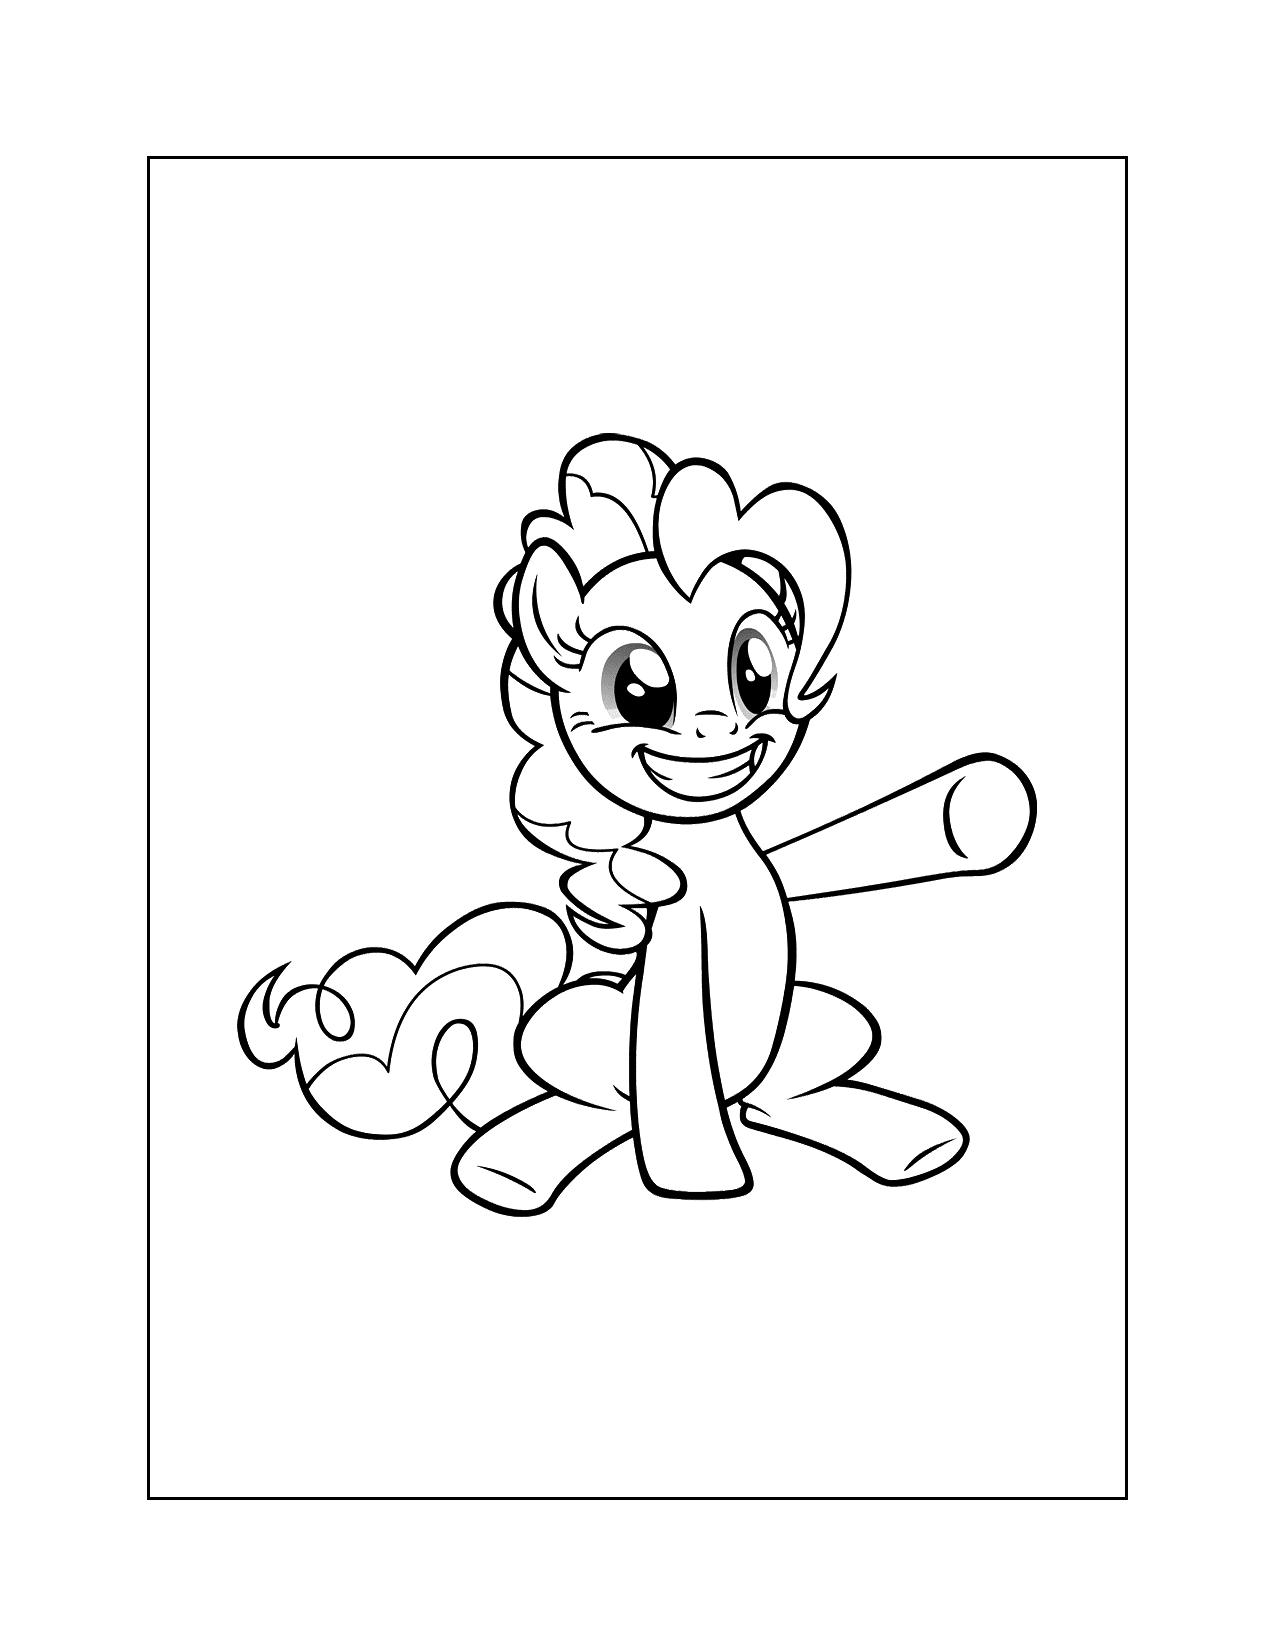 Cute Mlp Coloring Pages